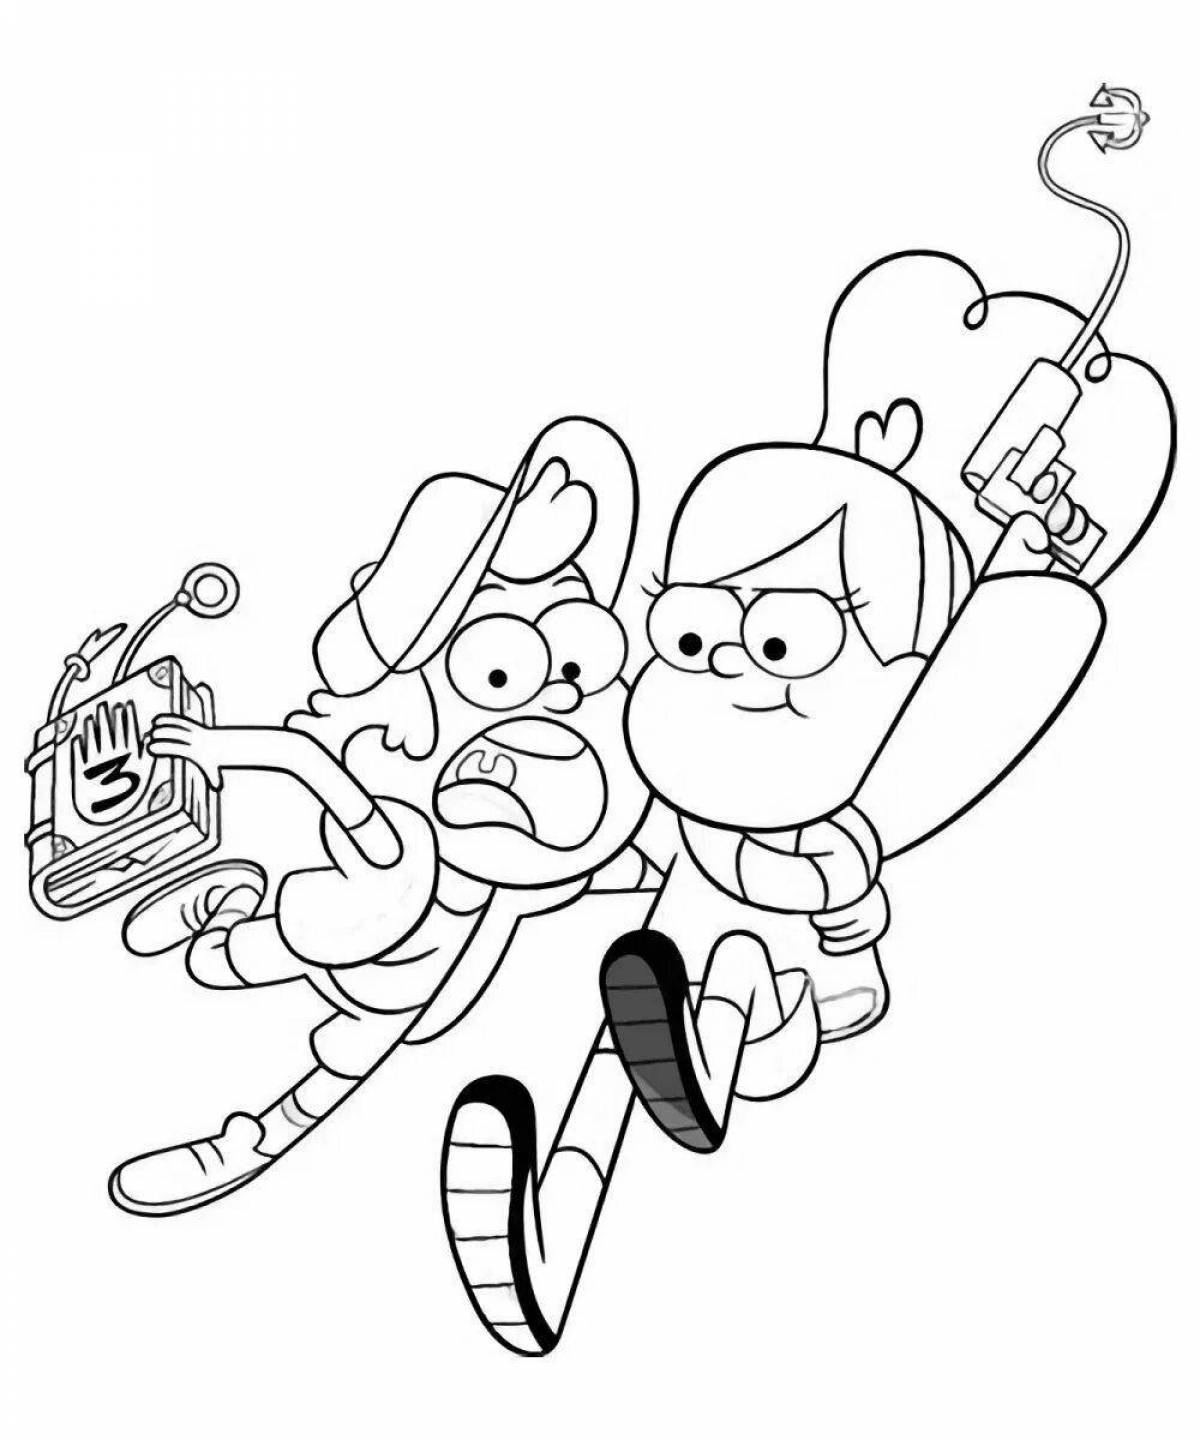 Charming gravity falls coloring page